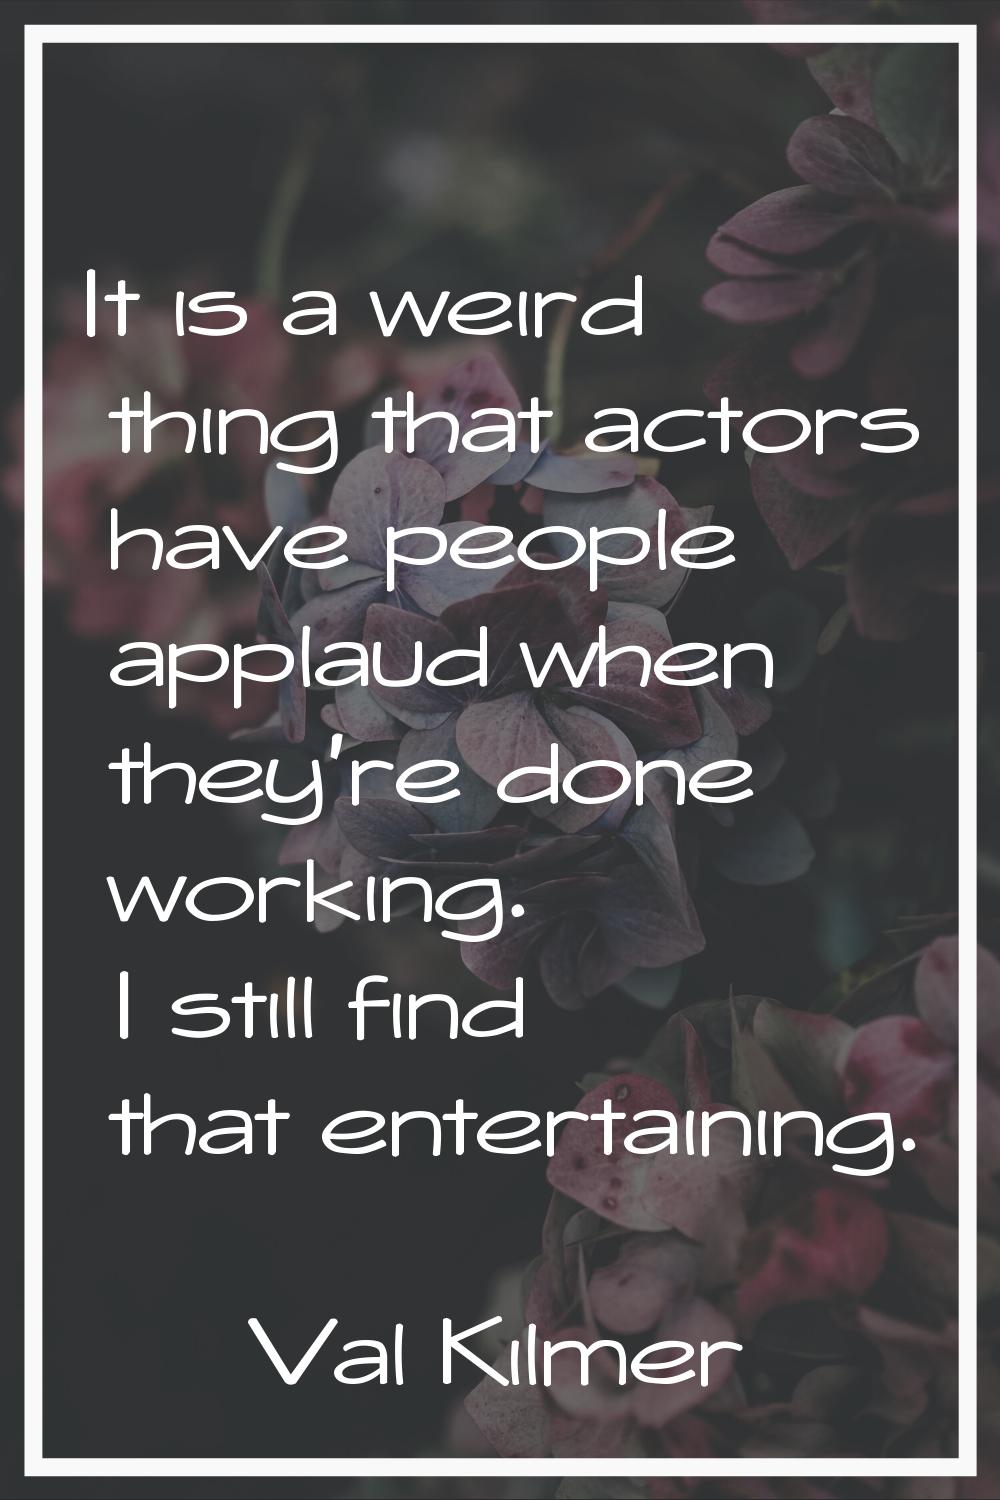 It is a weird thing that actors have people applaud when they're done working. I still find that en